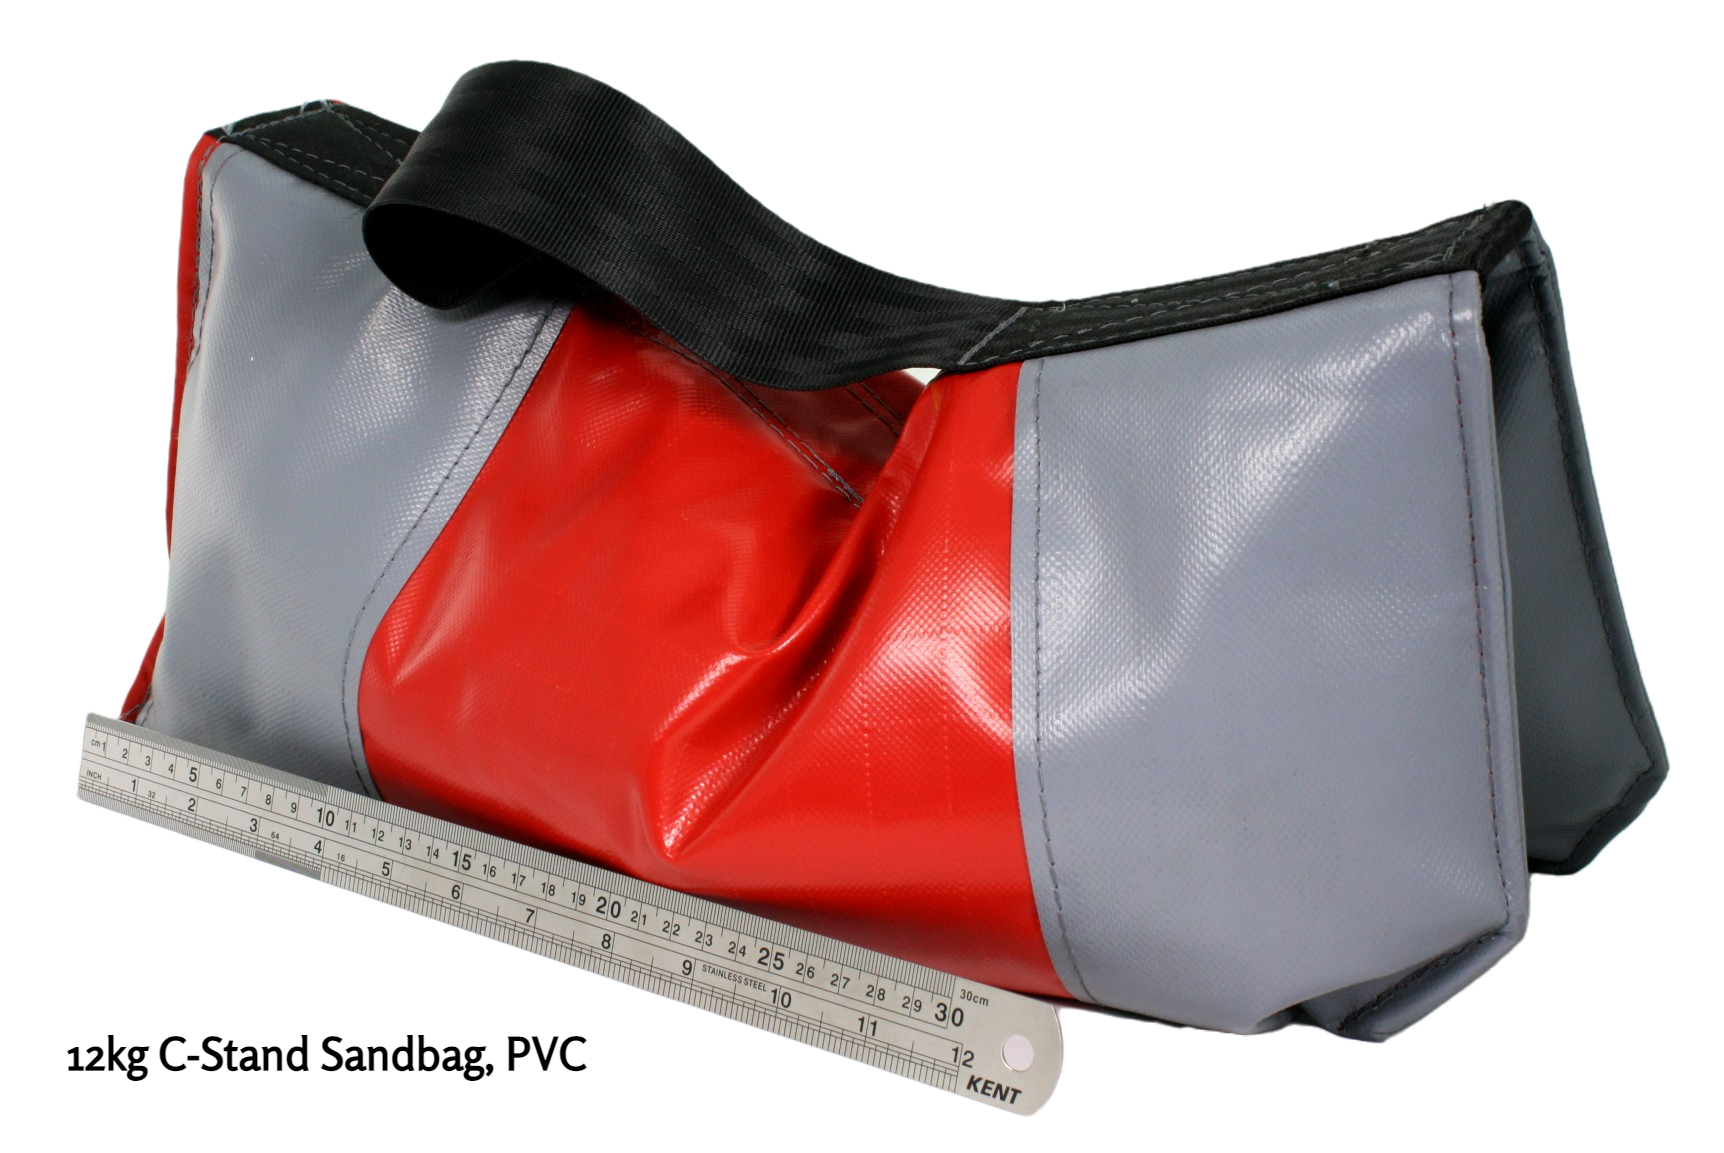 12kg C-stand sandbag, in red and grey, nex to a ruler showing the length is over 30cm